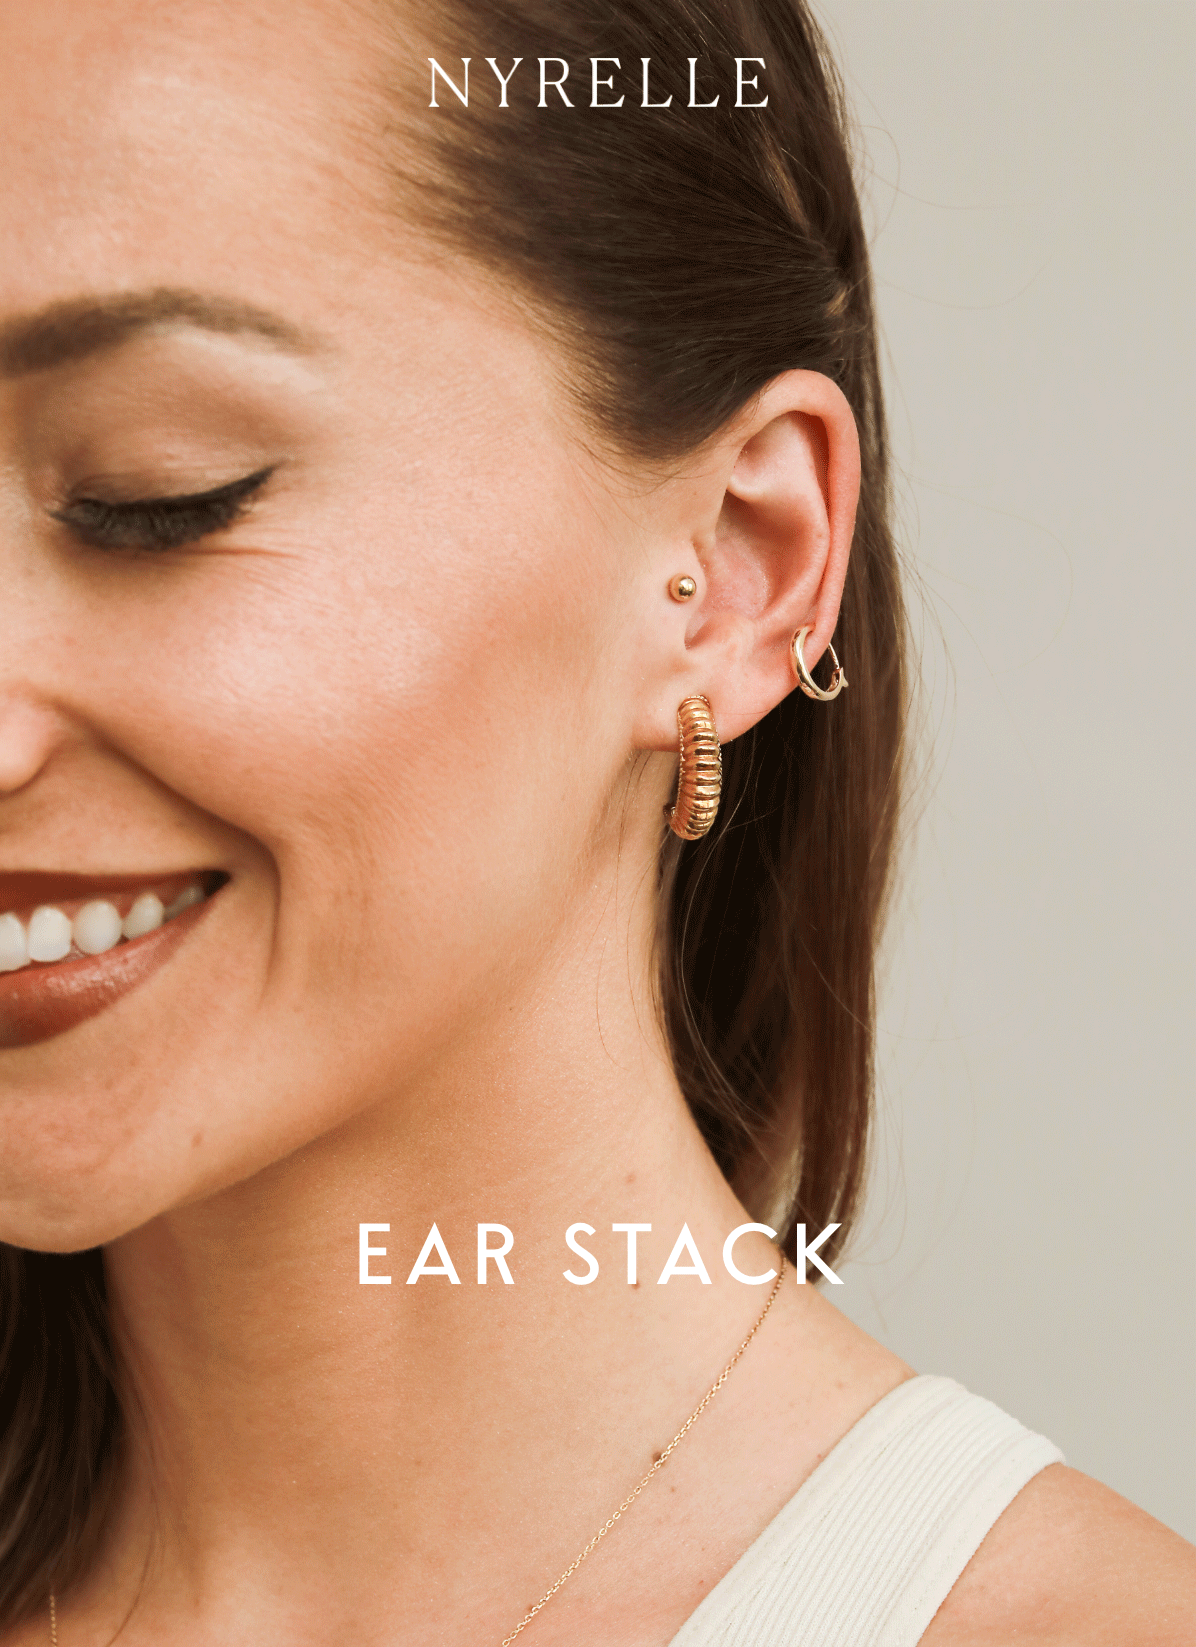 E-commerce Email GIF Design by Graphic Designer in Hong Kong Kyra Janelle – Fashionable Ear Stacking Guide for NYRELLE Jewelry.